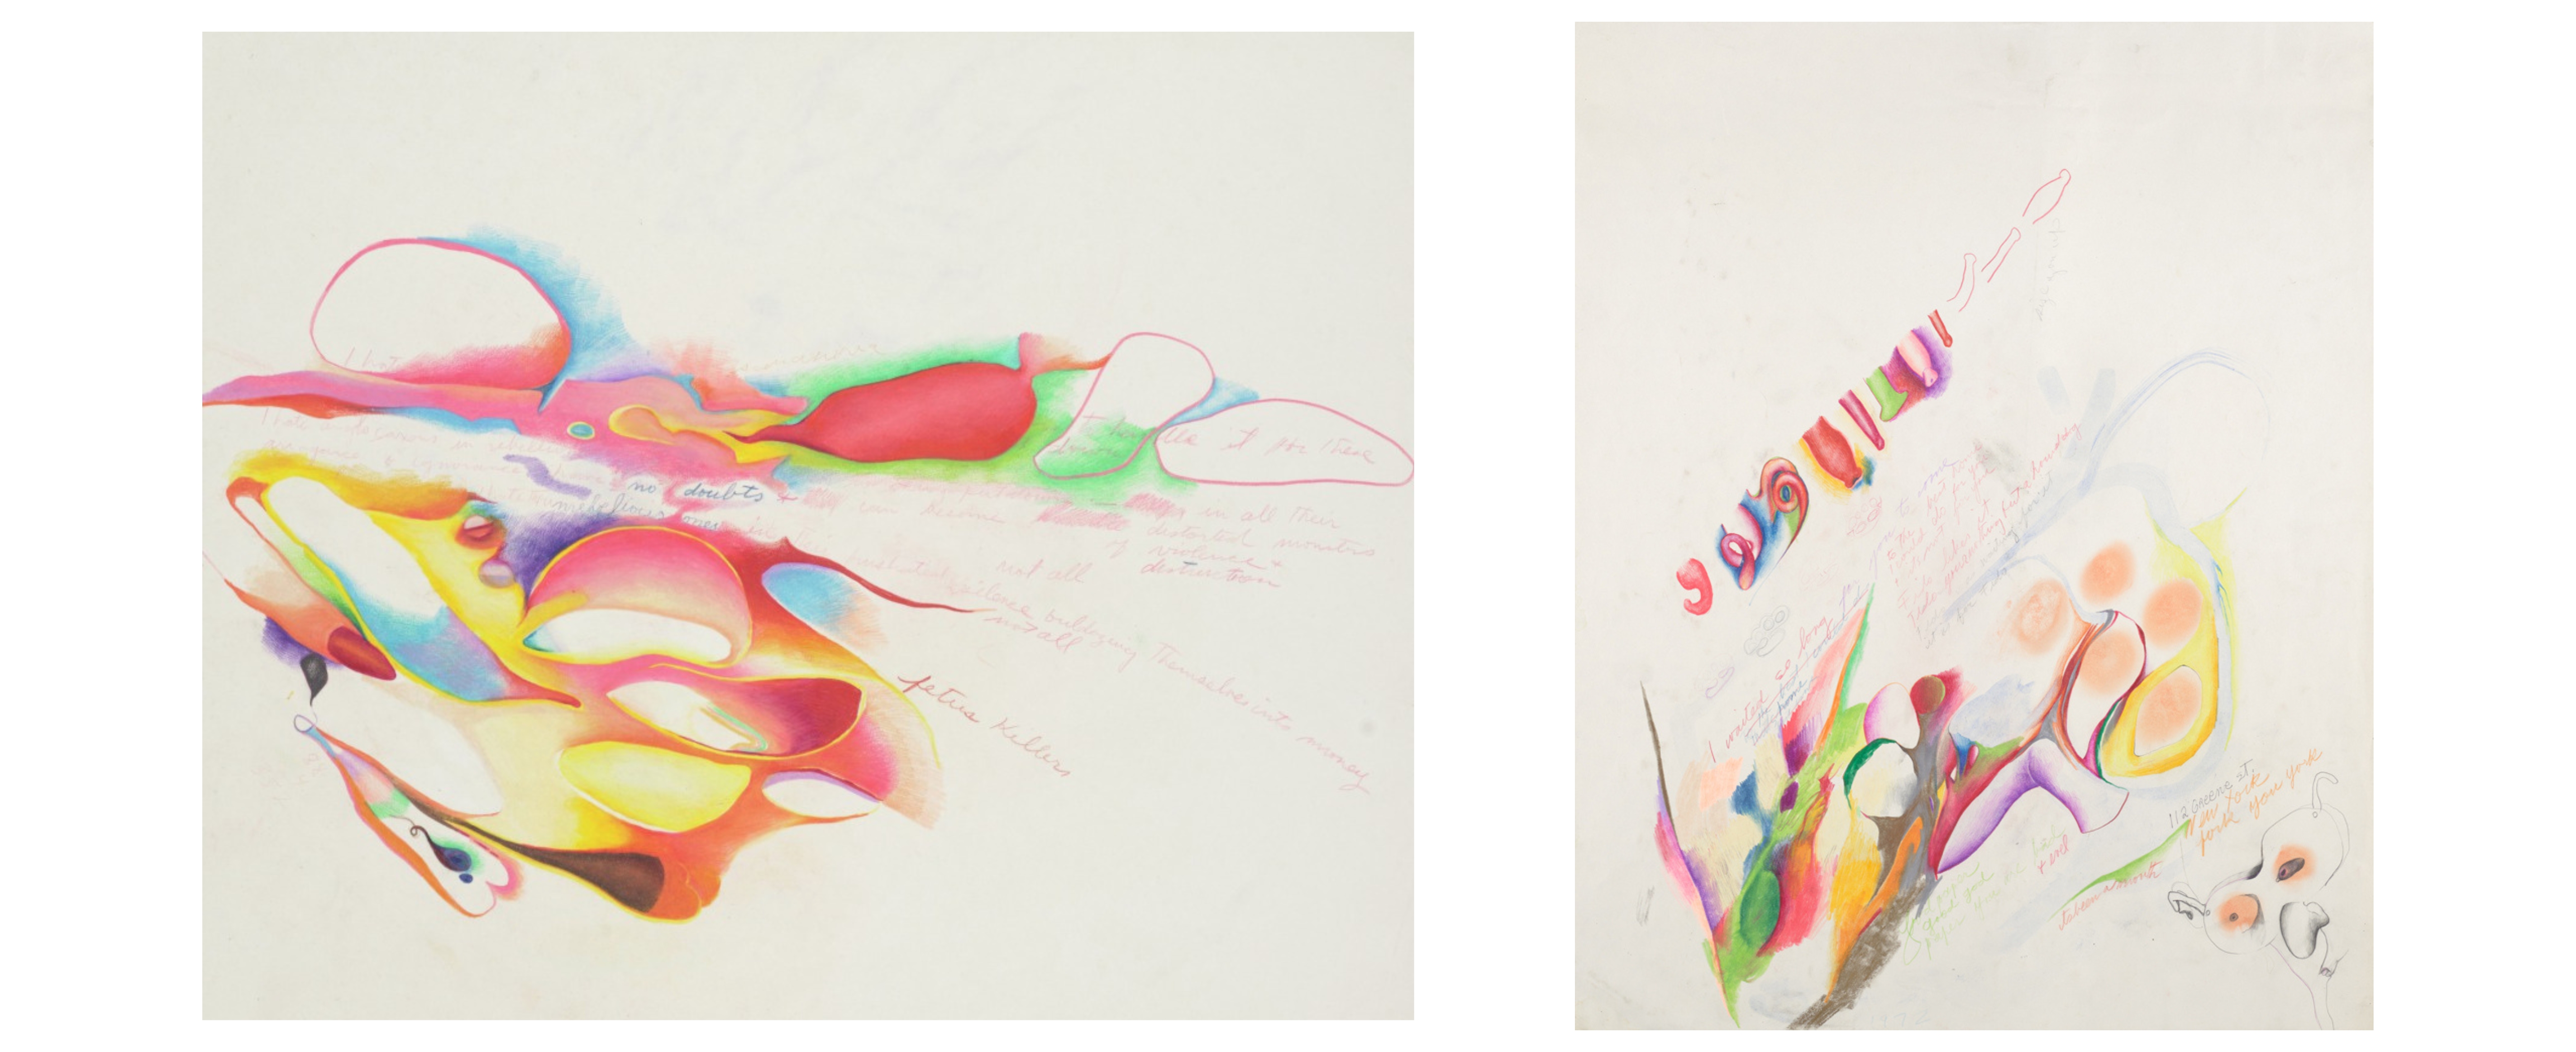 Two colorful sketches by Marisol that depict stylized fallopian tube and phallic imagery